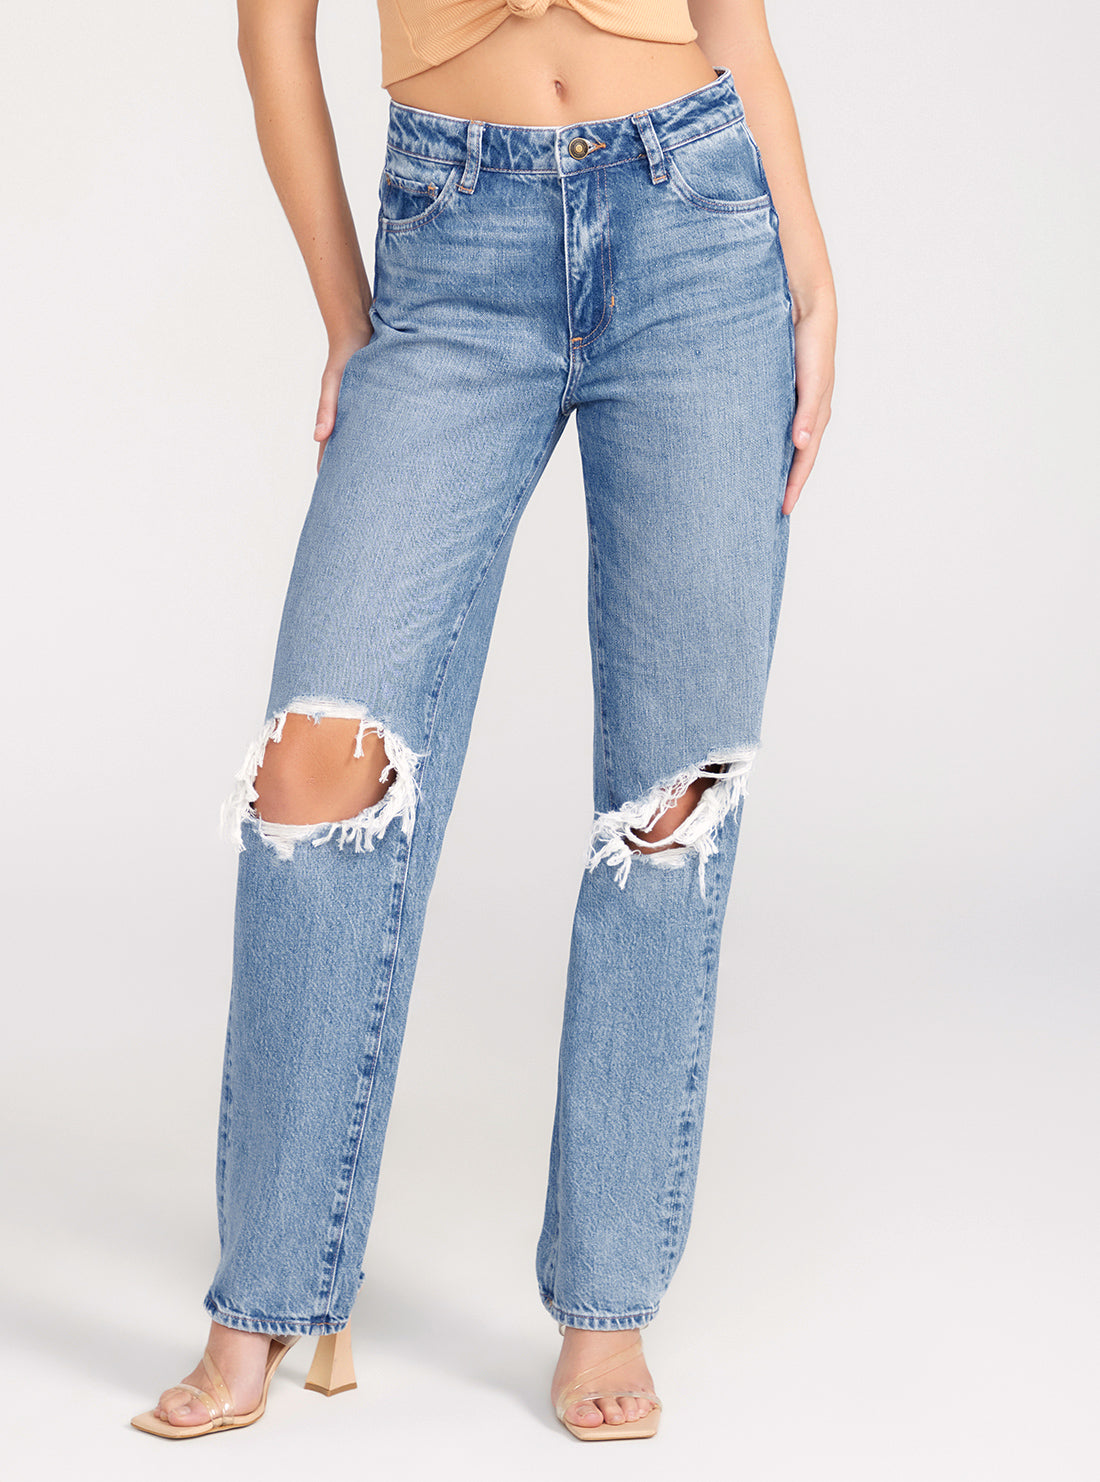 GUESS Mid-Rise Relaxed Straight Leg Jeans In Light Wash front view